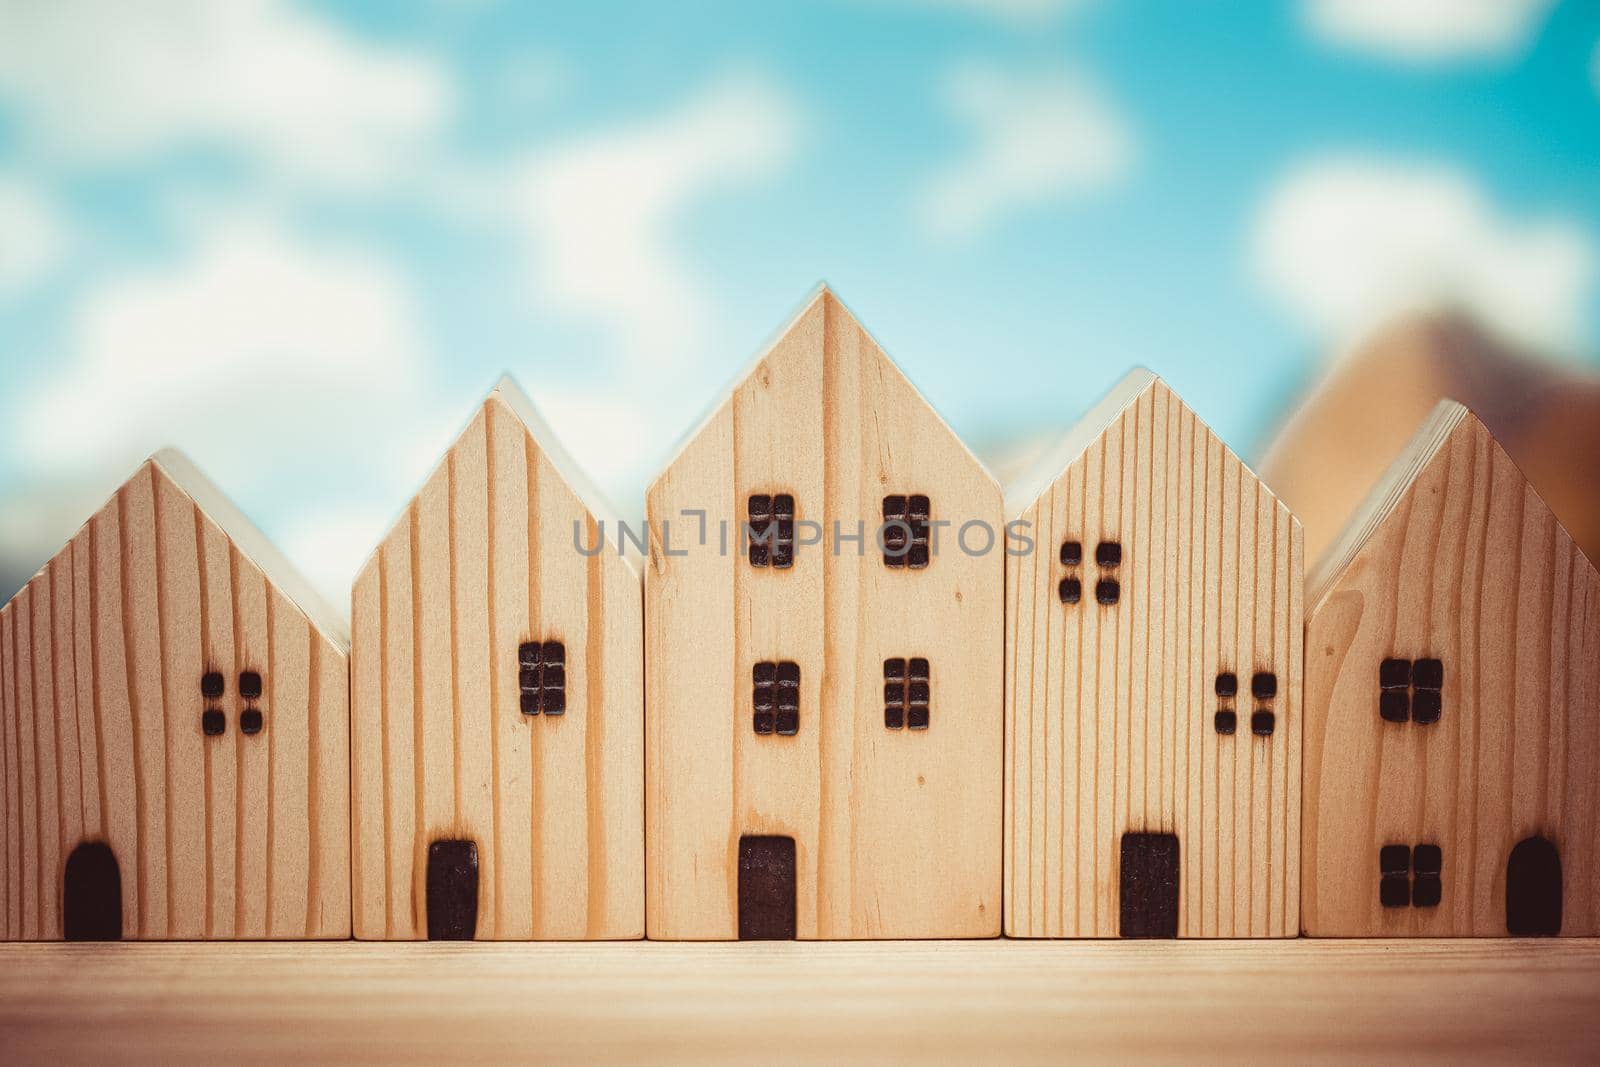 wooden home model toy many house row community art decoration for background vintage colortone. by qualitystocks